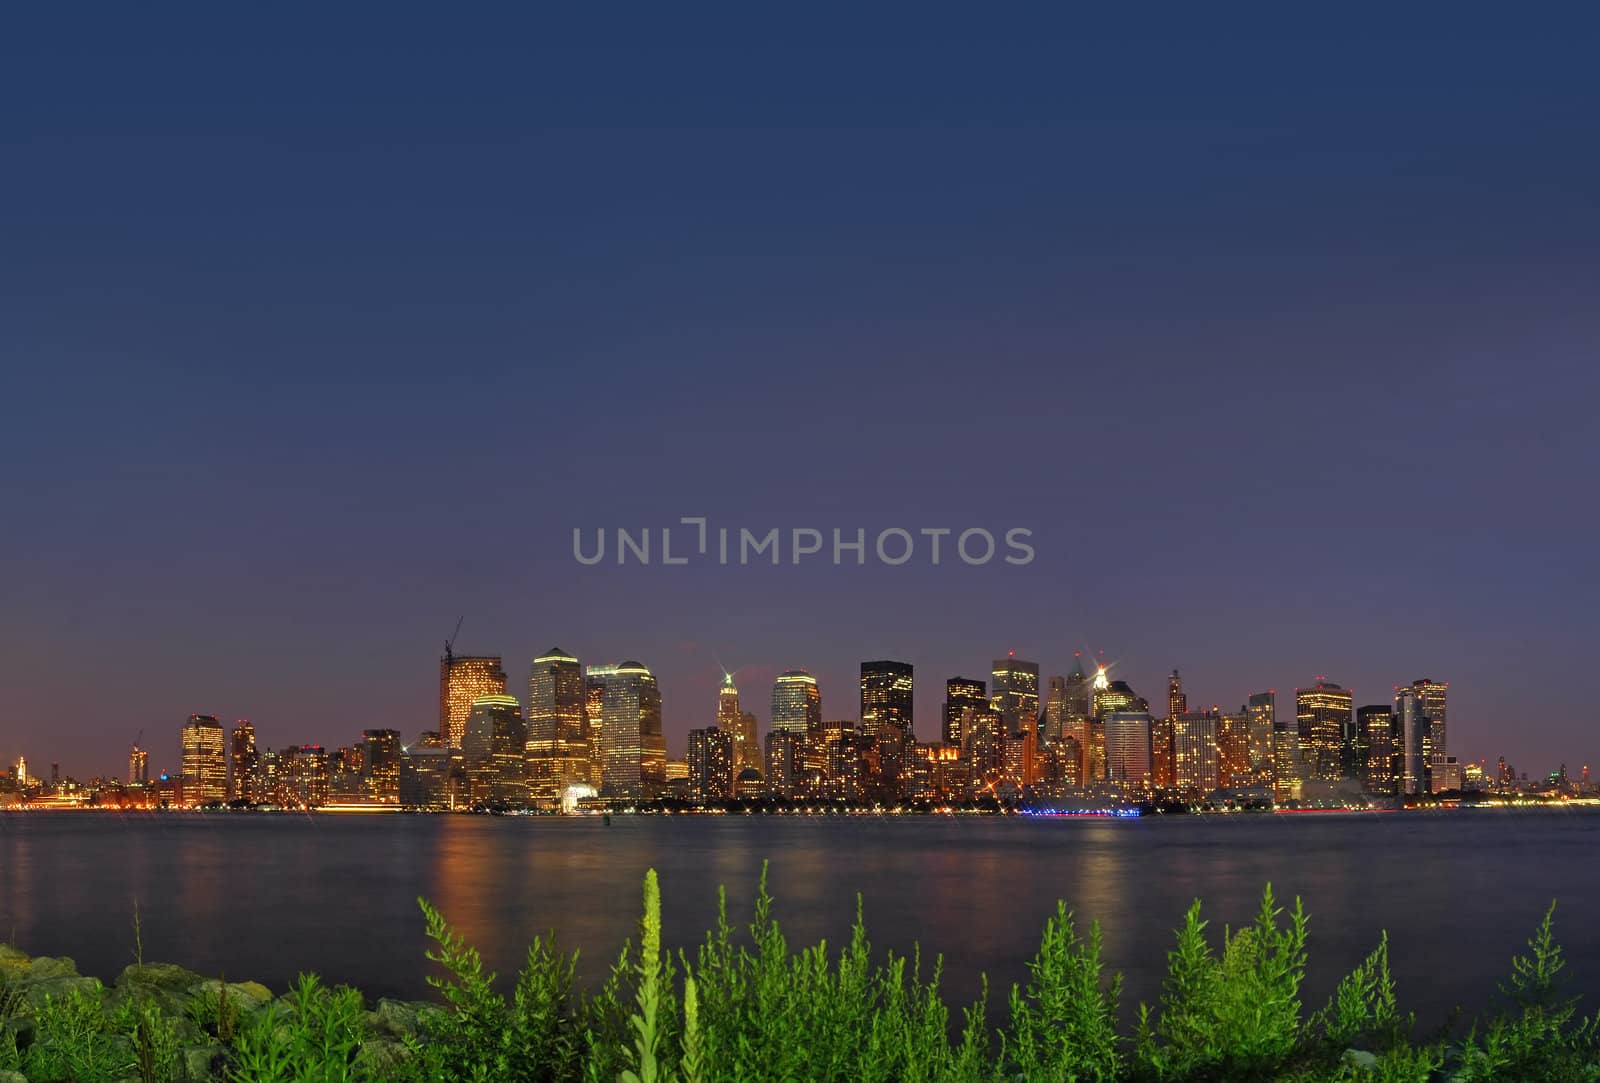 new york at night, photo taken from jersey city across hudson river